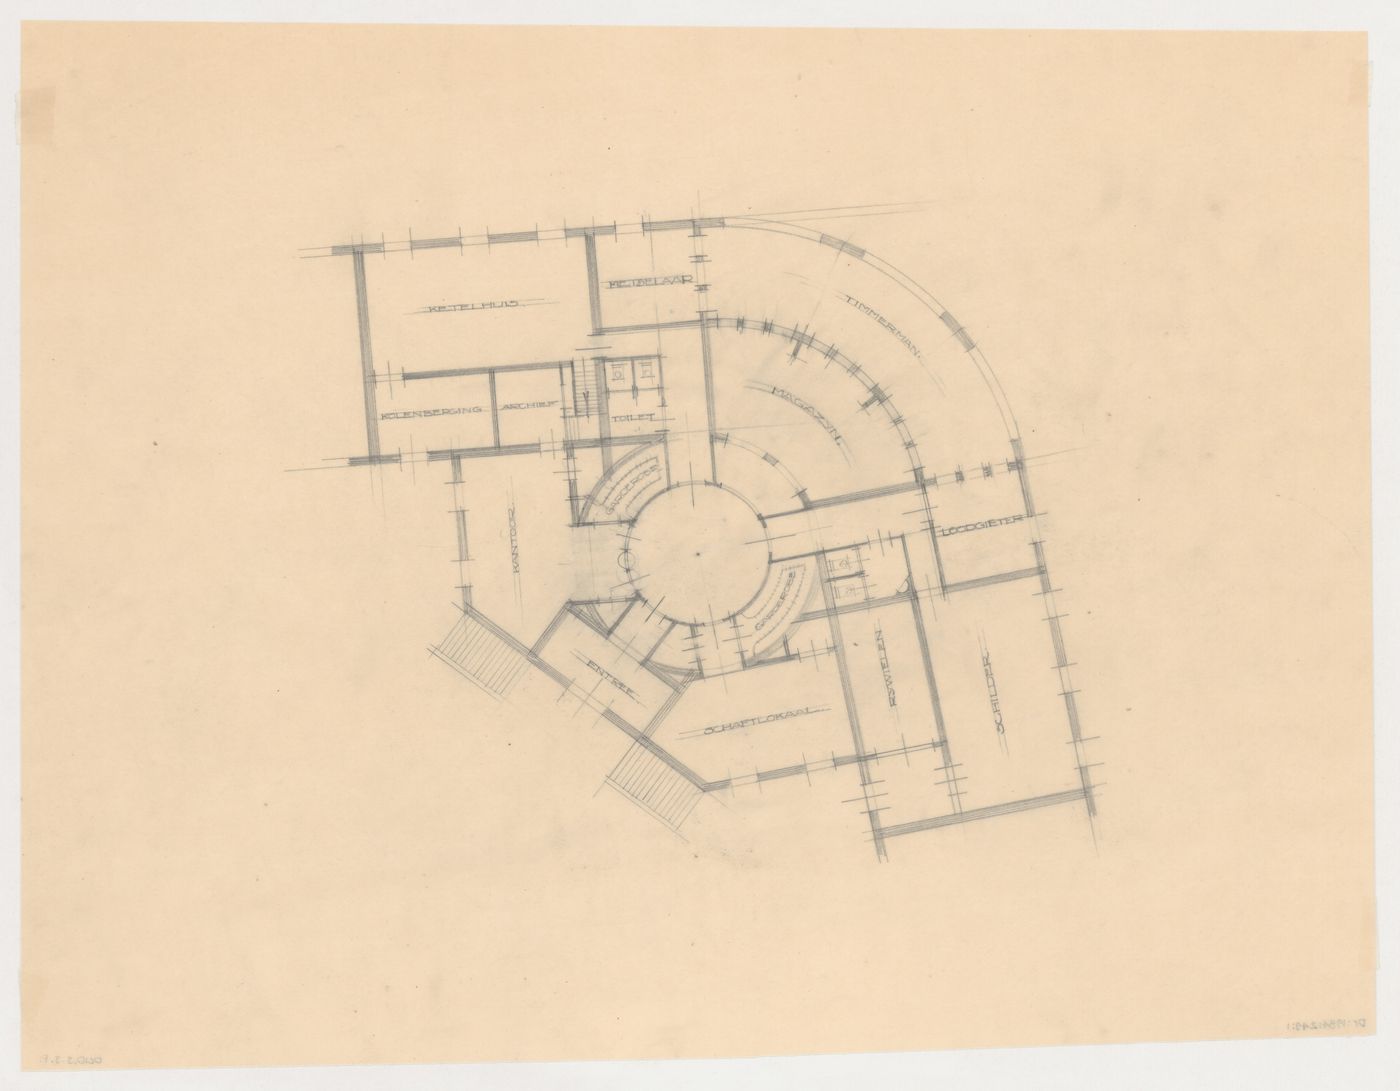 Ground floor plan for a city hall for the reconstruction of the Hofplein (city centre), Rotterdam, Netherlands